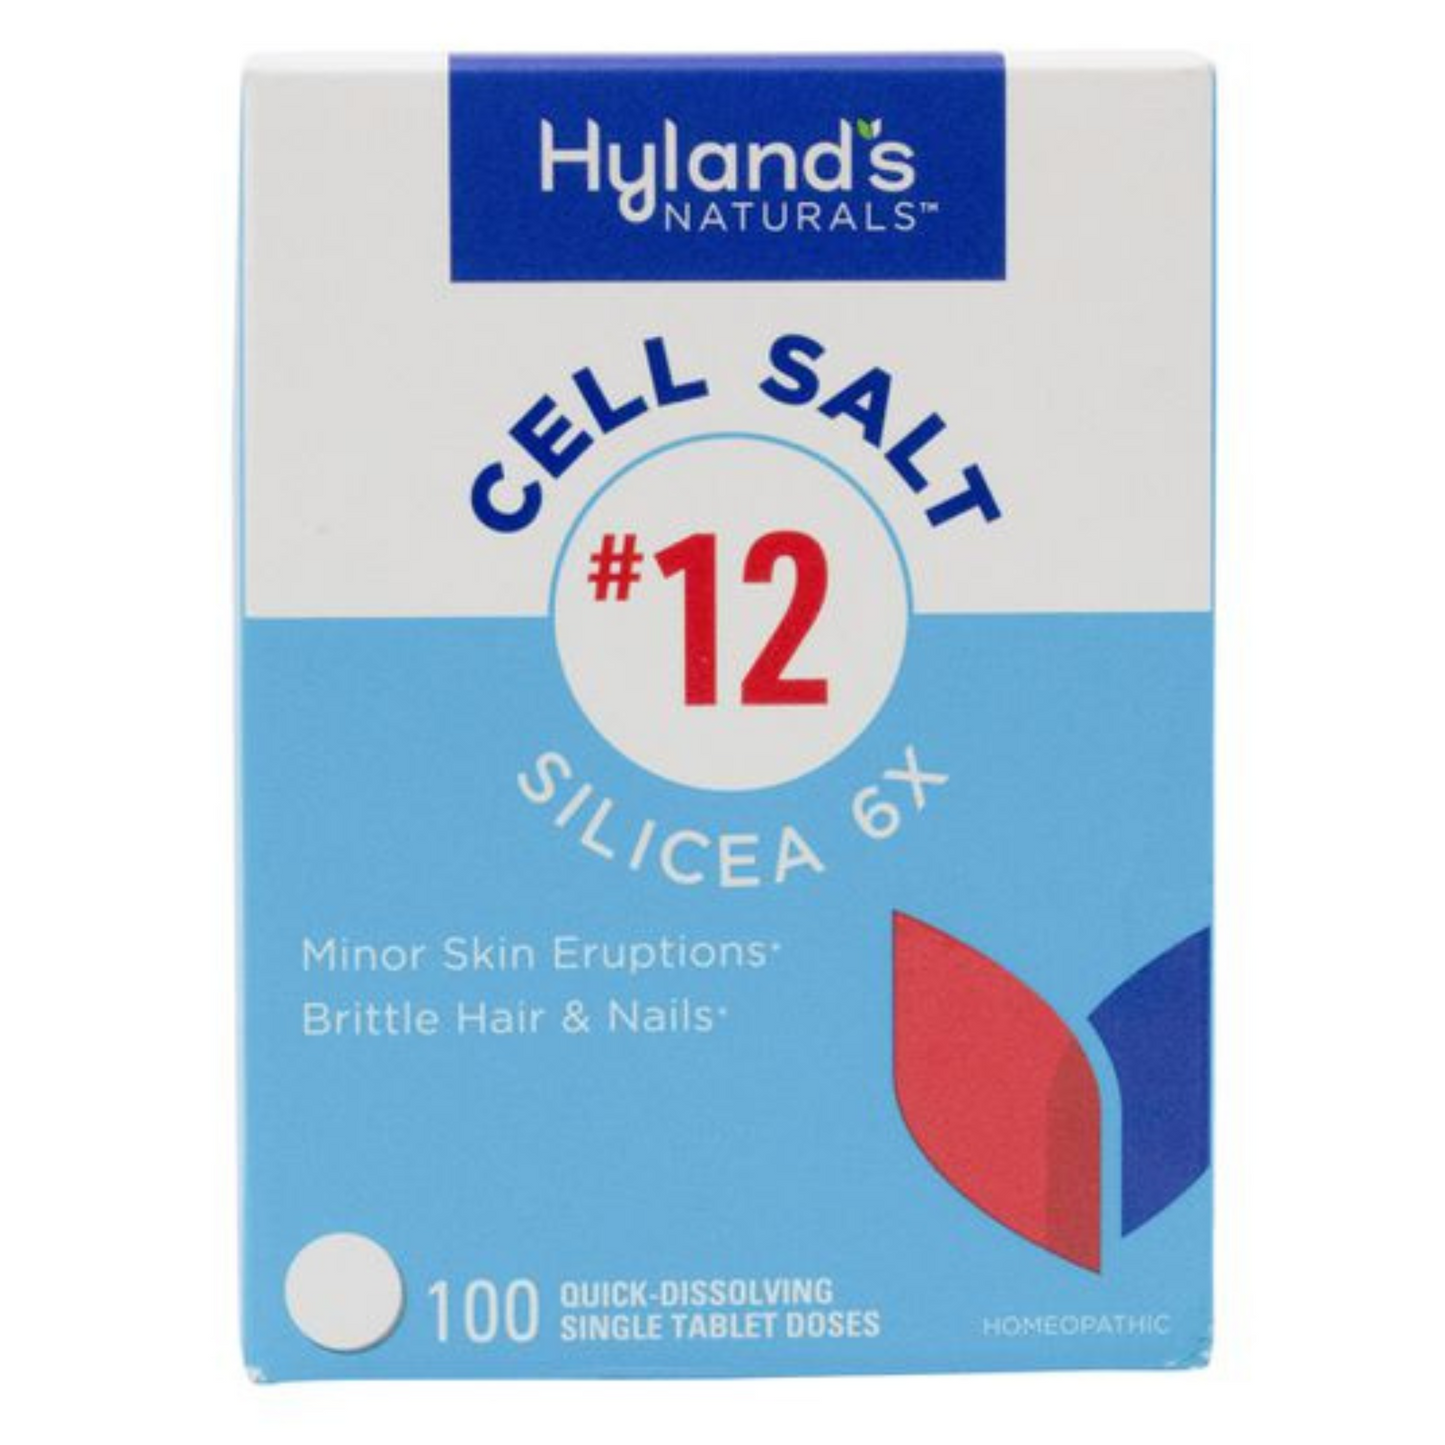 Primary Image of Cell Salt Silicea 6x Tablets 